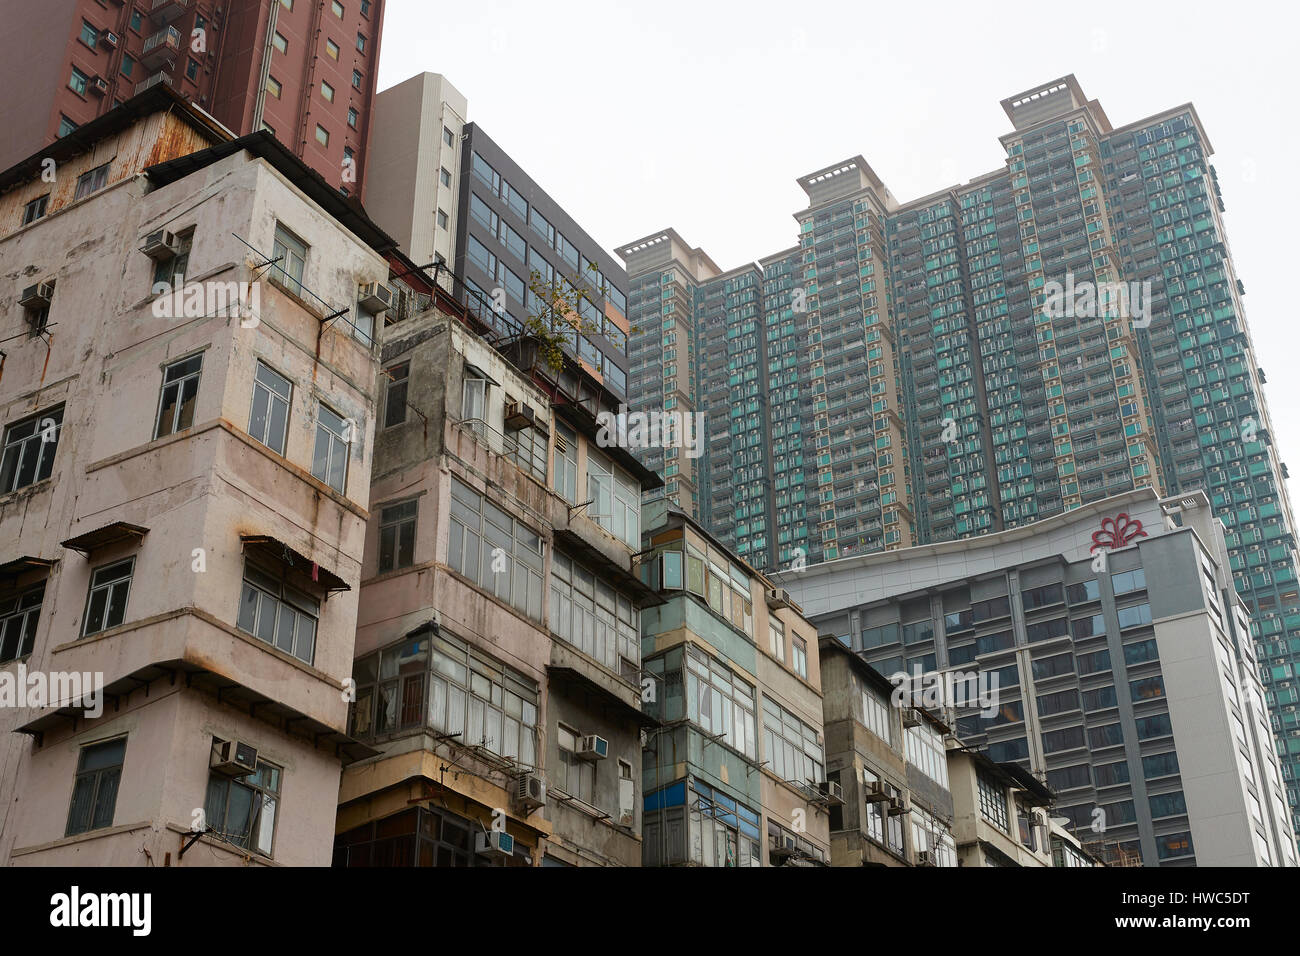 Contrasting Up-Market And Low Rent Buildings In Kowloon City, Hong Kong. Stock Photo